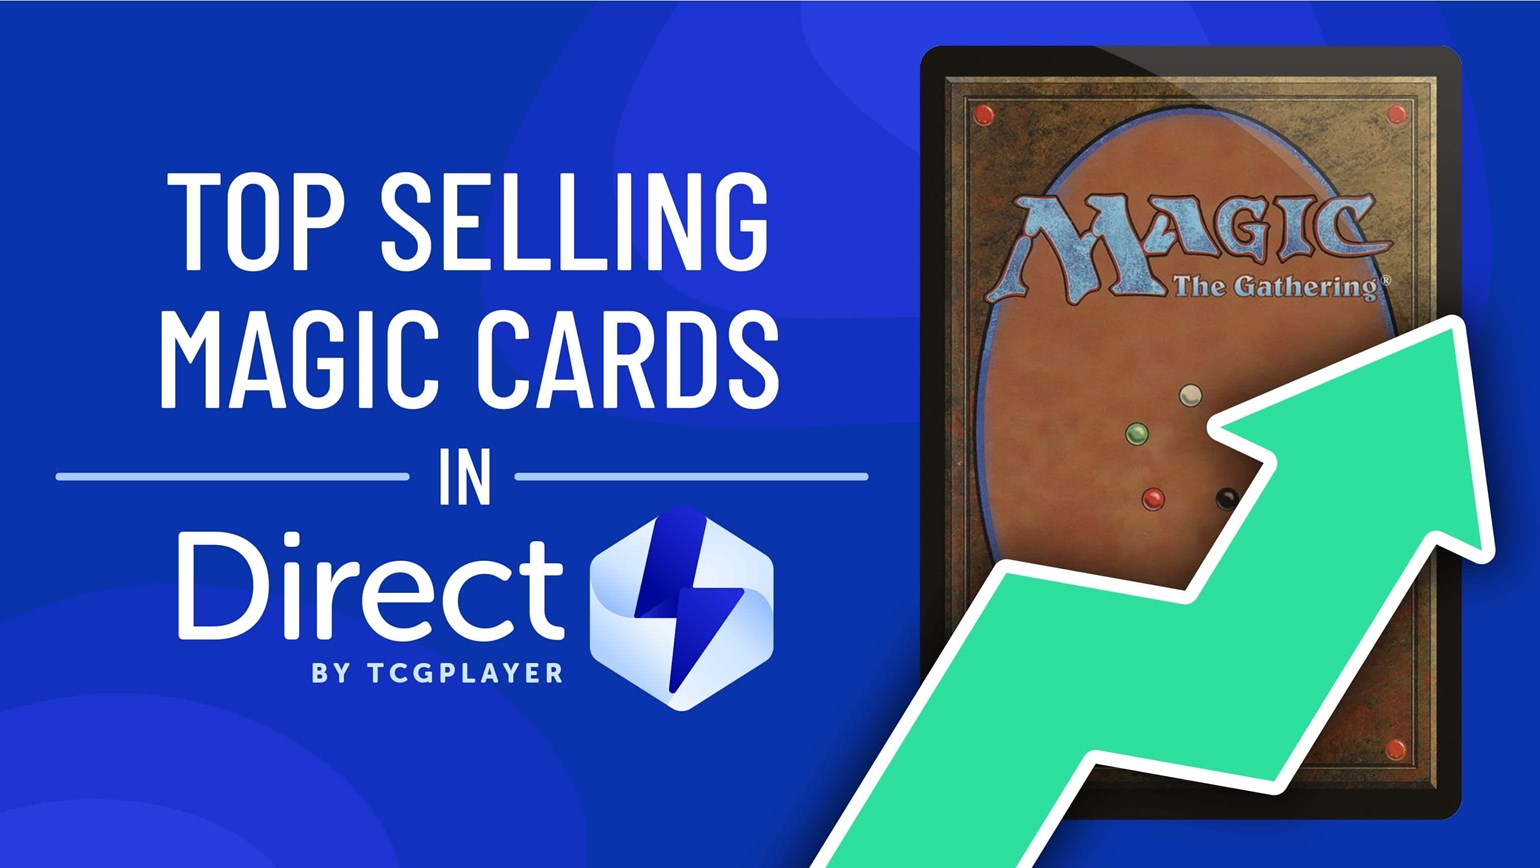 May Top Selling Magic: The Gathering Cards in Direct by TCGplayer